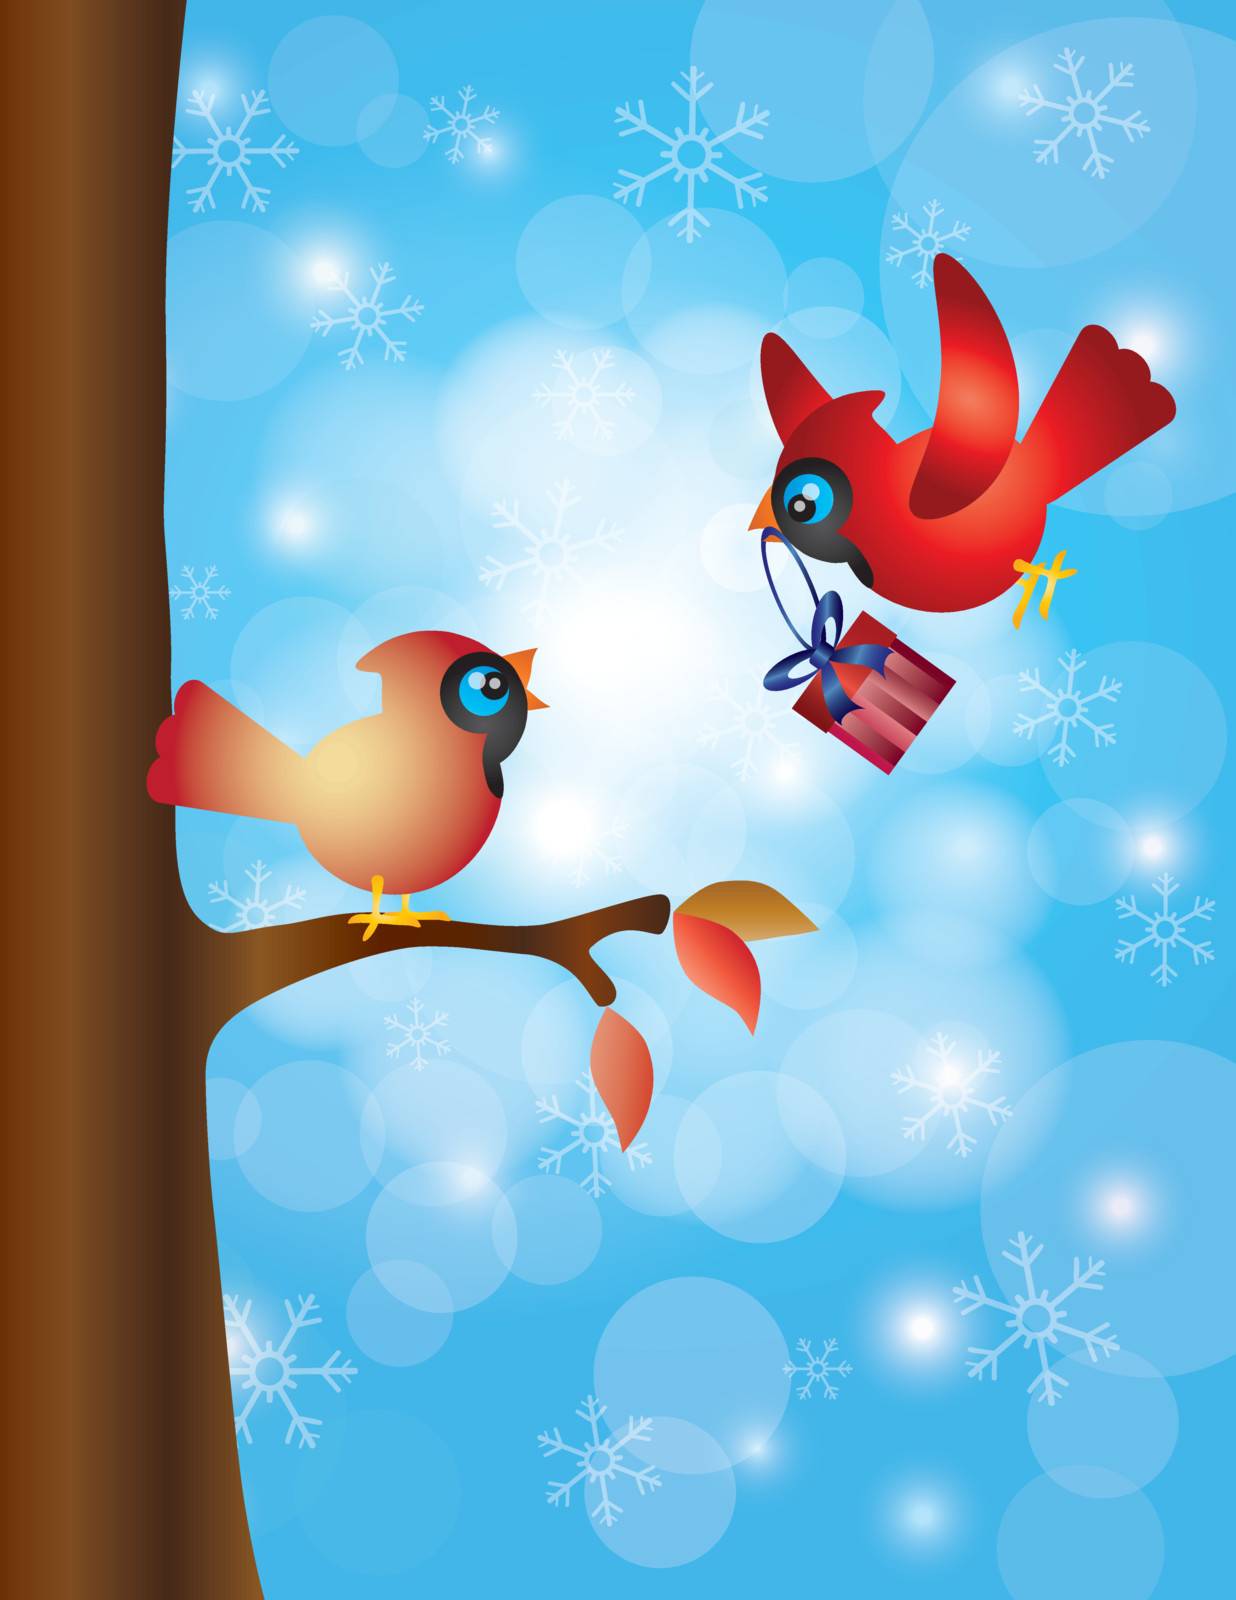 Cardinal Pair with Tree and Snowflakes Illustration by jpldesigns